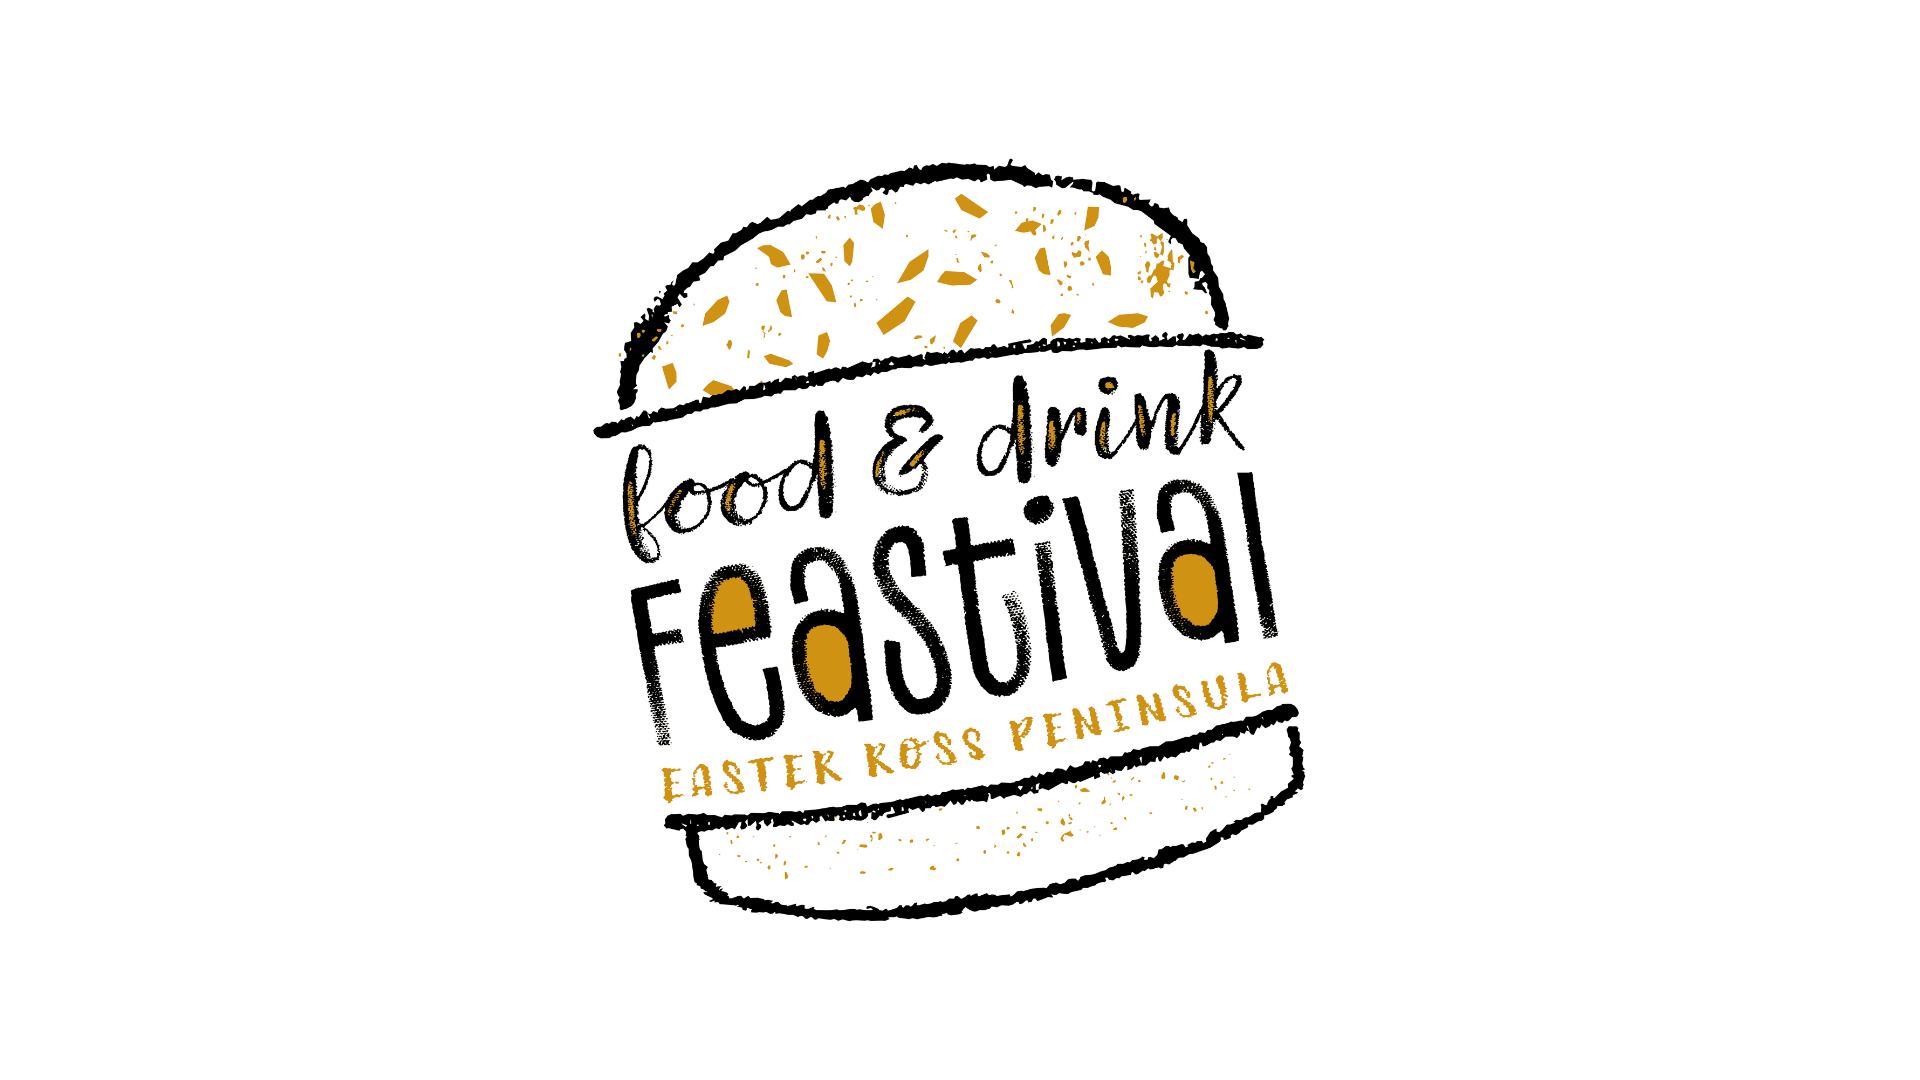 a design of a burger with wording about the Festival